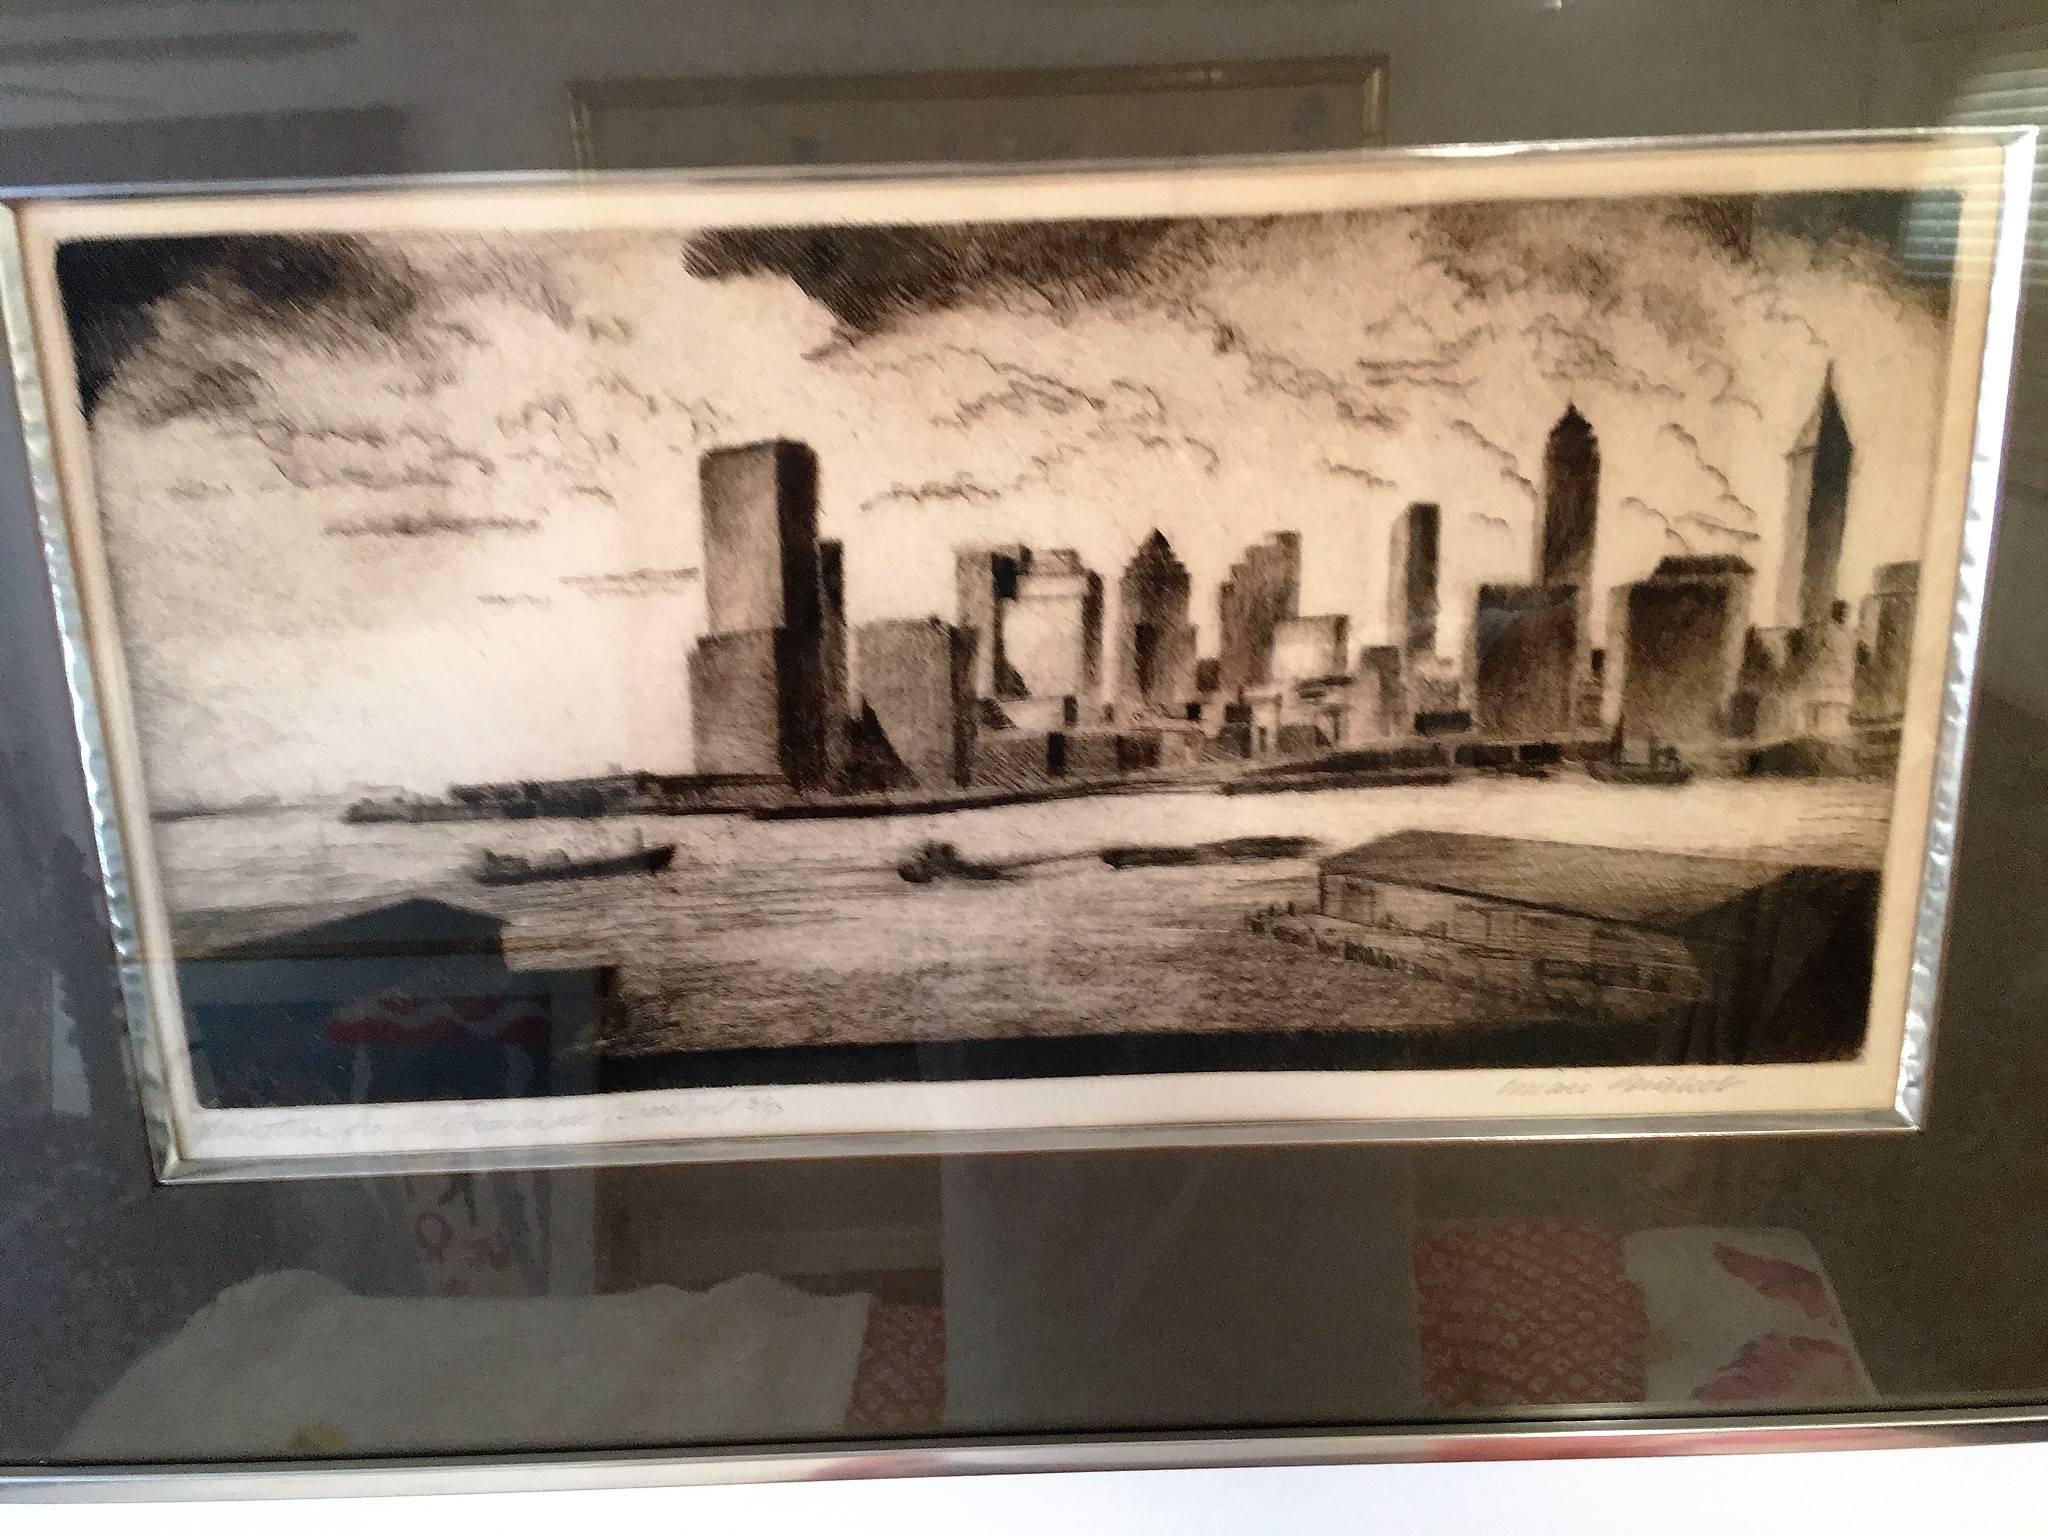 Interesting numbered etching 3/50 titled Manhattan from The Promenade, Brooklyn. Pencil signed and titled though artist's signature is hard to determine.